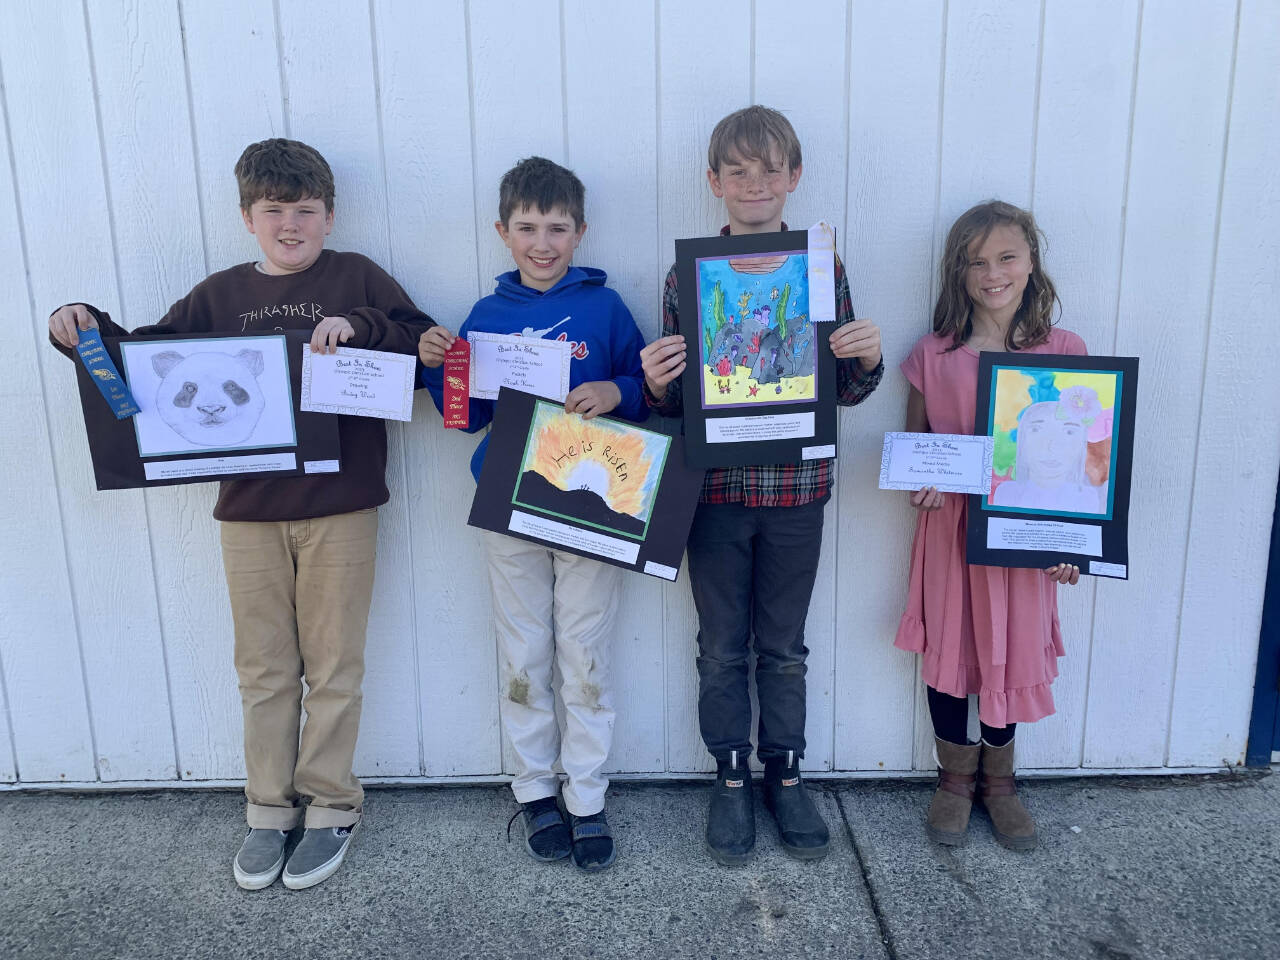 Photo courtesy of Olympic Christian School
Artists in Olympic Christian School’s fifth-grade division include award-winners, from left, Bodey Wood, Noah Kiser, Ben Lovell and Sami Whitmore.